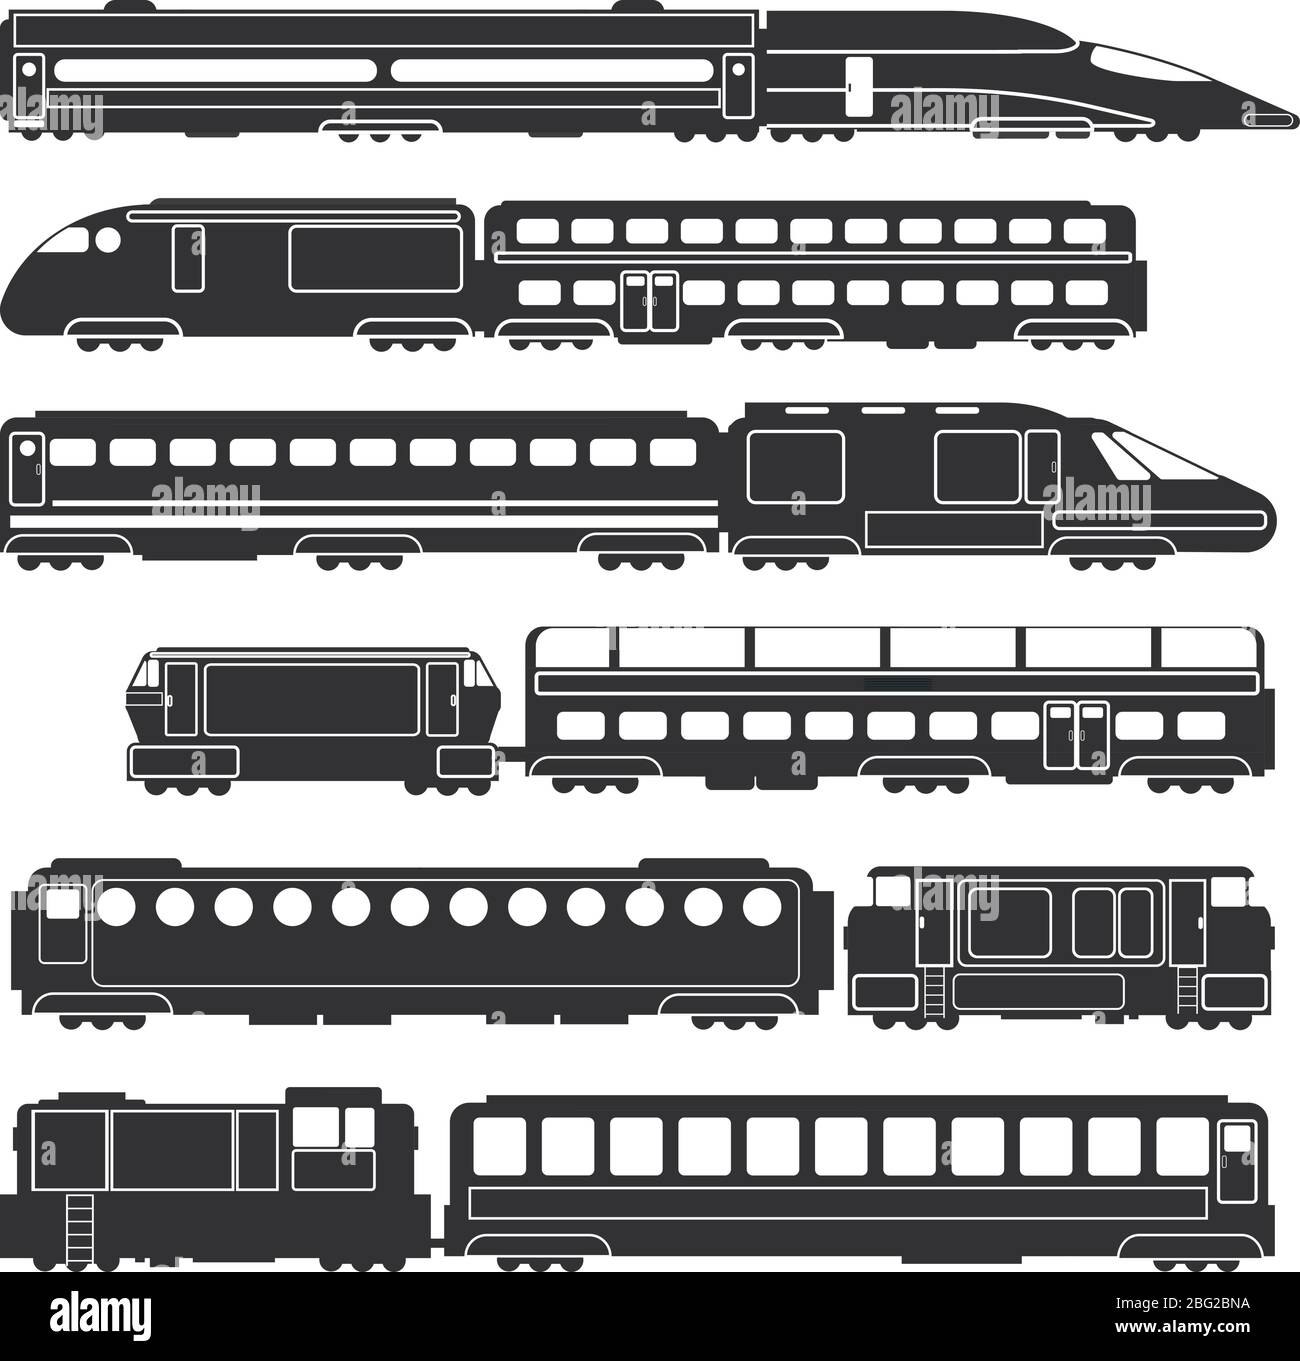 Trains and wagons black vector railway cargo and passenger transportation silhouettes. Train transport black silhouette, locomotive passenger illustra Stock Vector